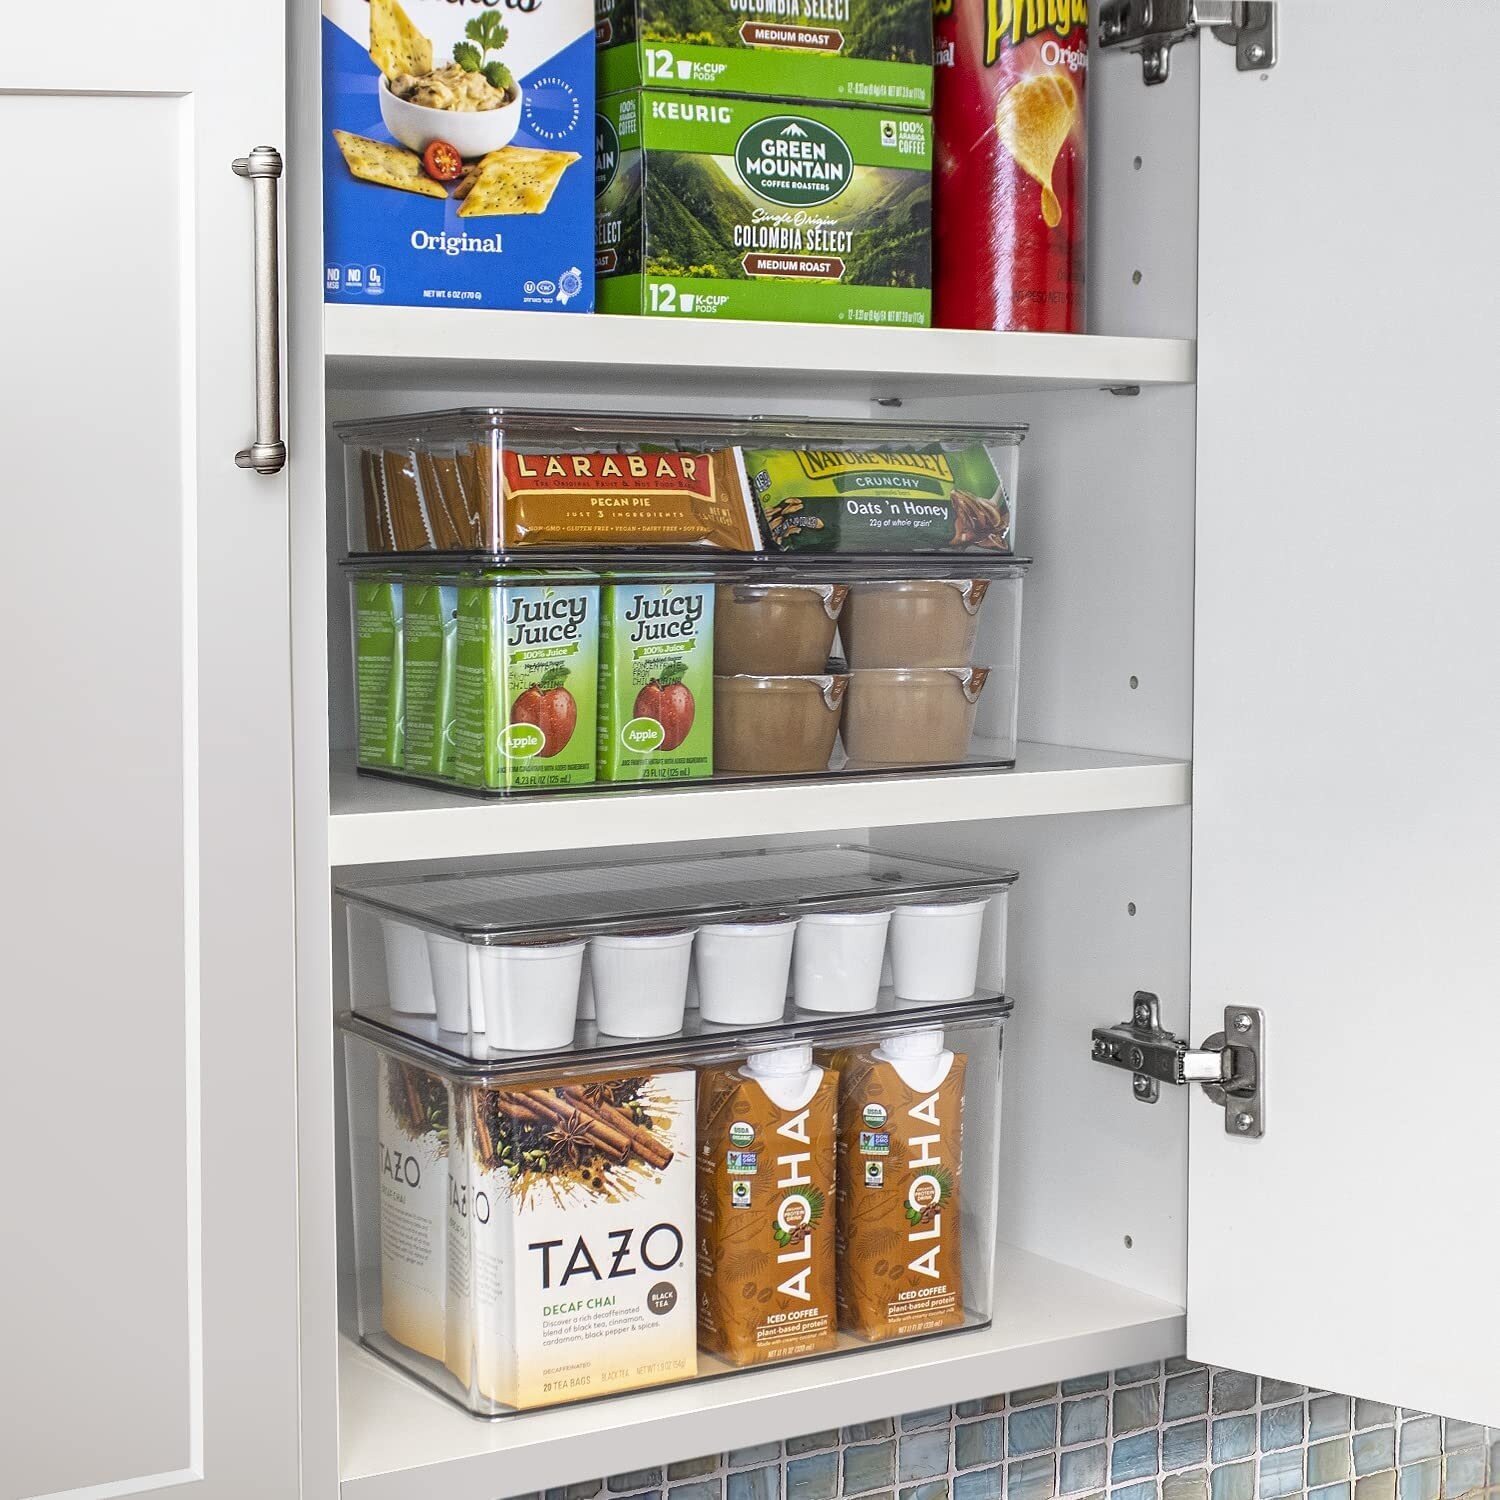 https://ak1.ostkcdn.com/images/products/is/images/direct/8976a64f1cfdc1ad8e7de221af508bfad5d86707/Organizer-Bins%2C-With-Lids%2C-Kitchen-Pantry-Organization%2C-Food-Storage-Containers-%282-Piece-Container-Set-1-Small%2C-1-Medium%29.jpg